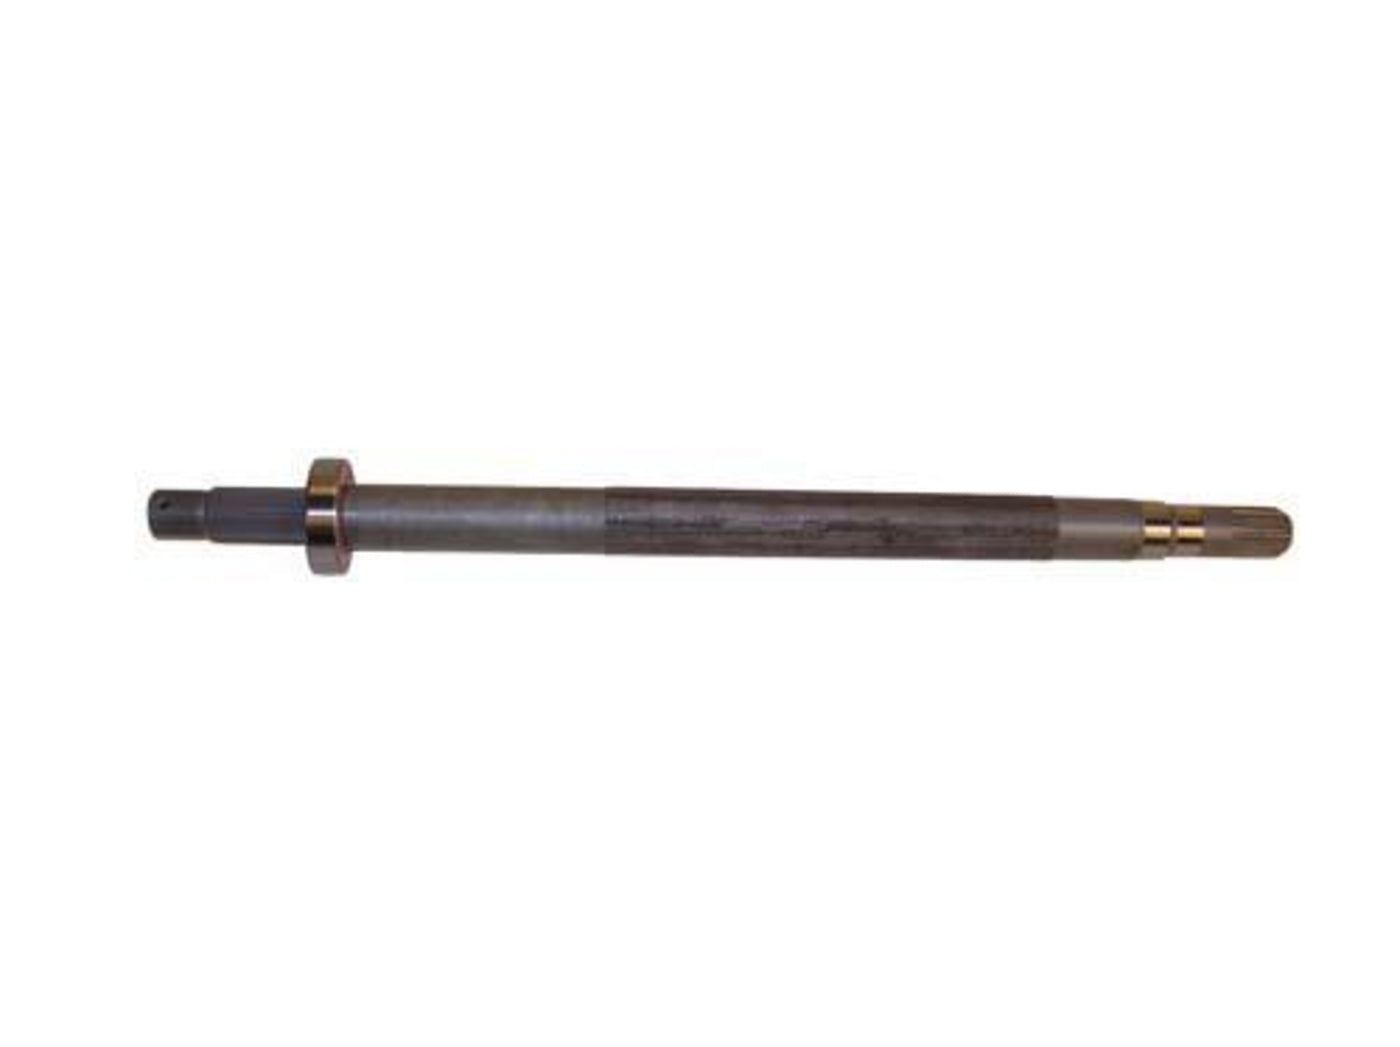 Passenger - E-Z-GO RXV Rear Axle (Years 2008-Up)